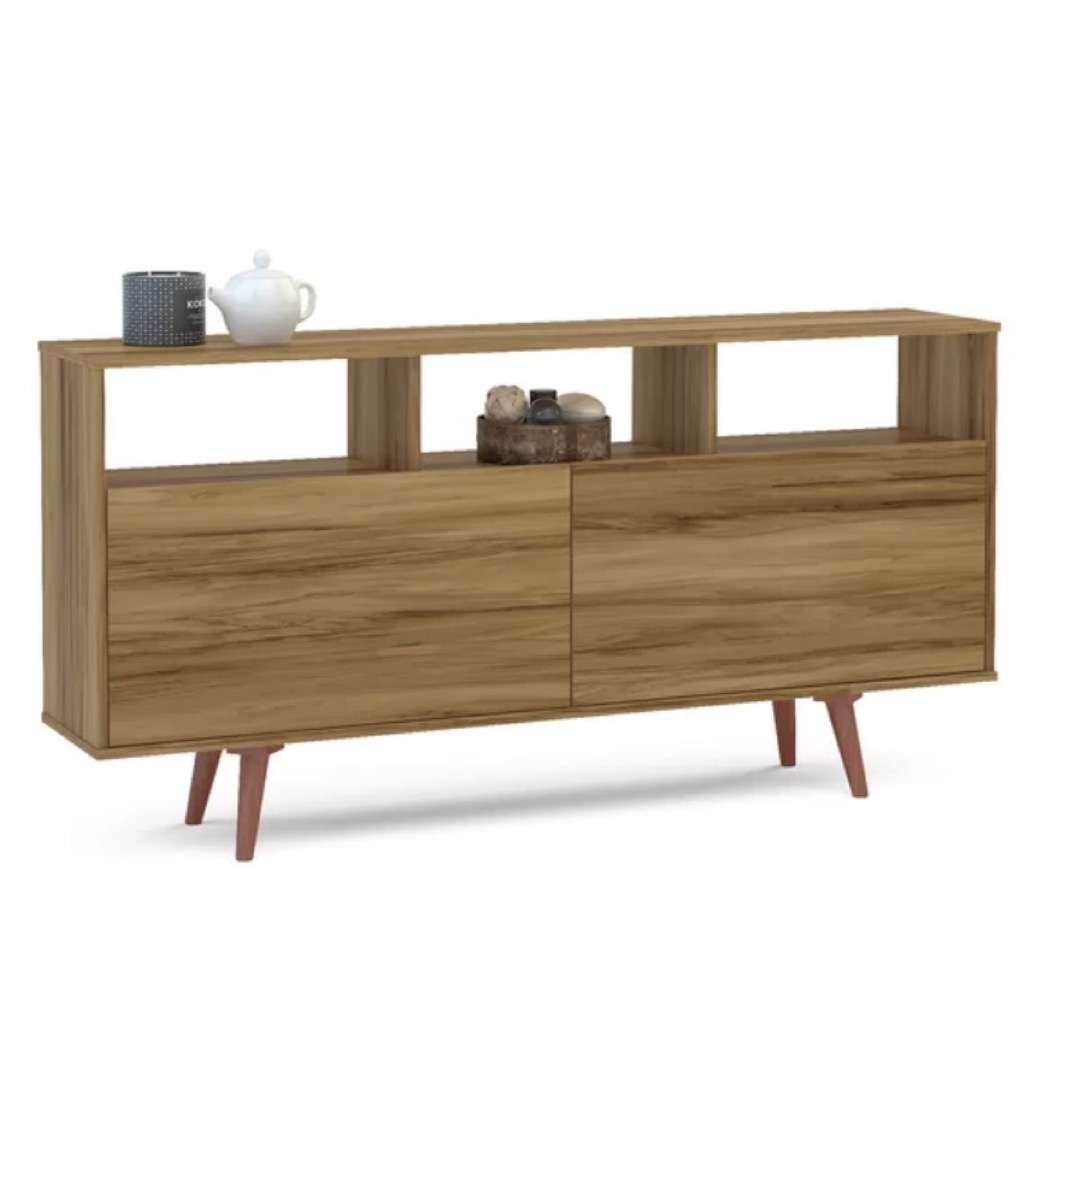 mid-century credenza, old fashioned home items